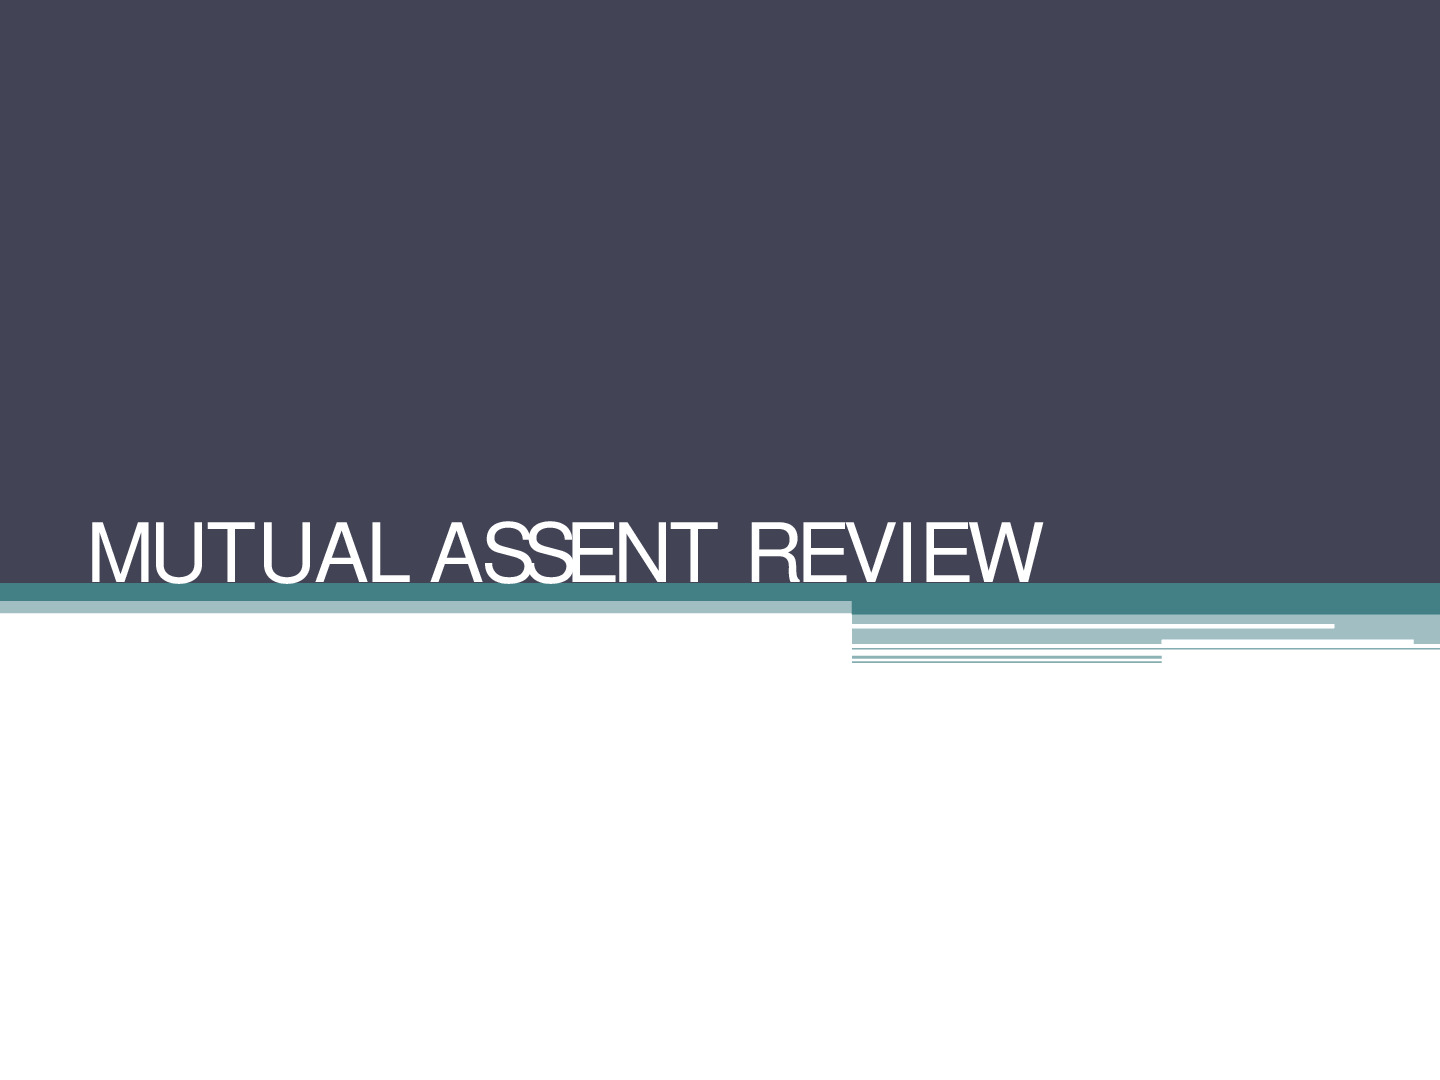 Mutual_Assent_Problems_Review.pdf